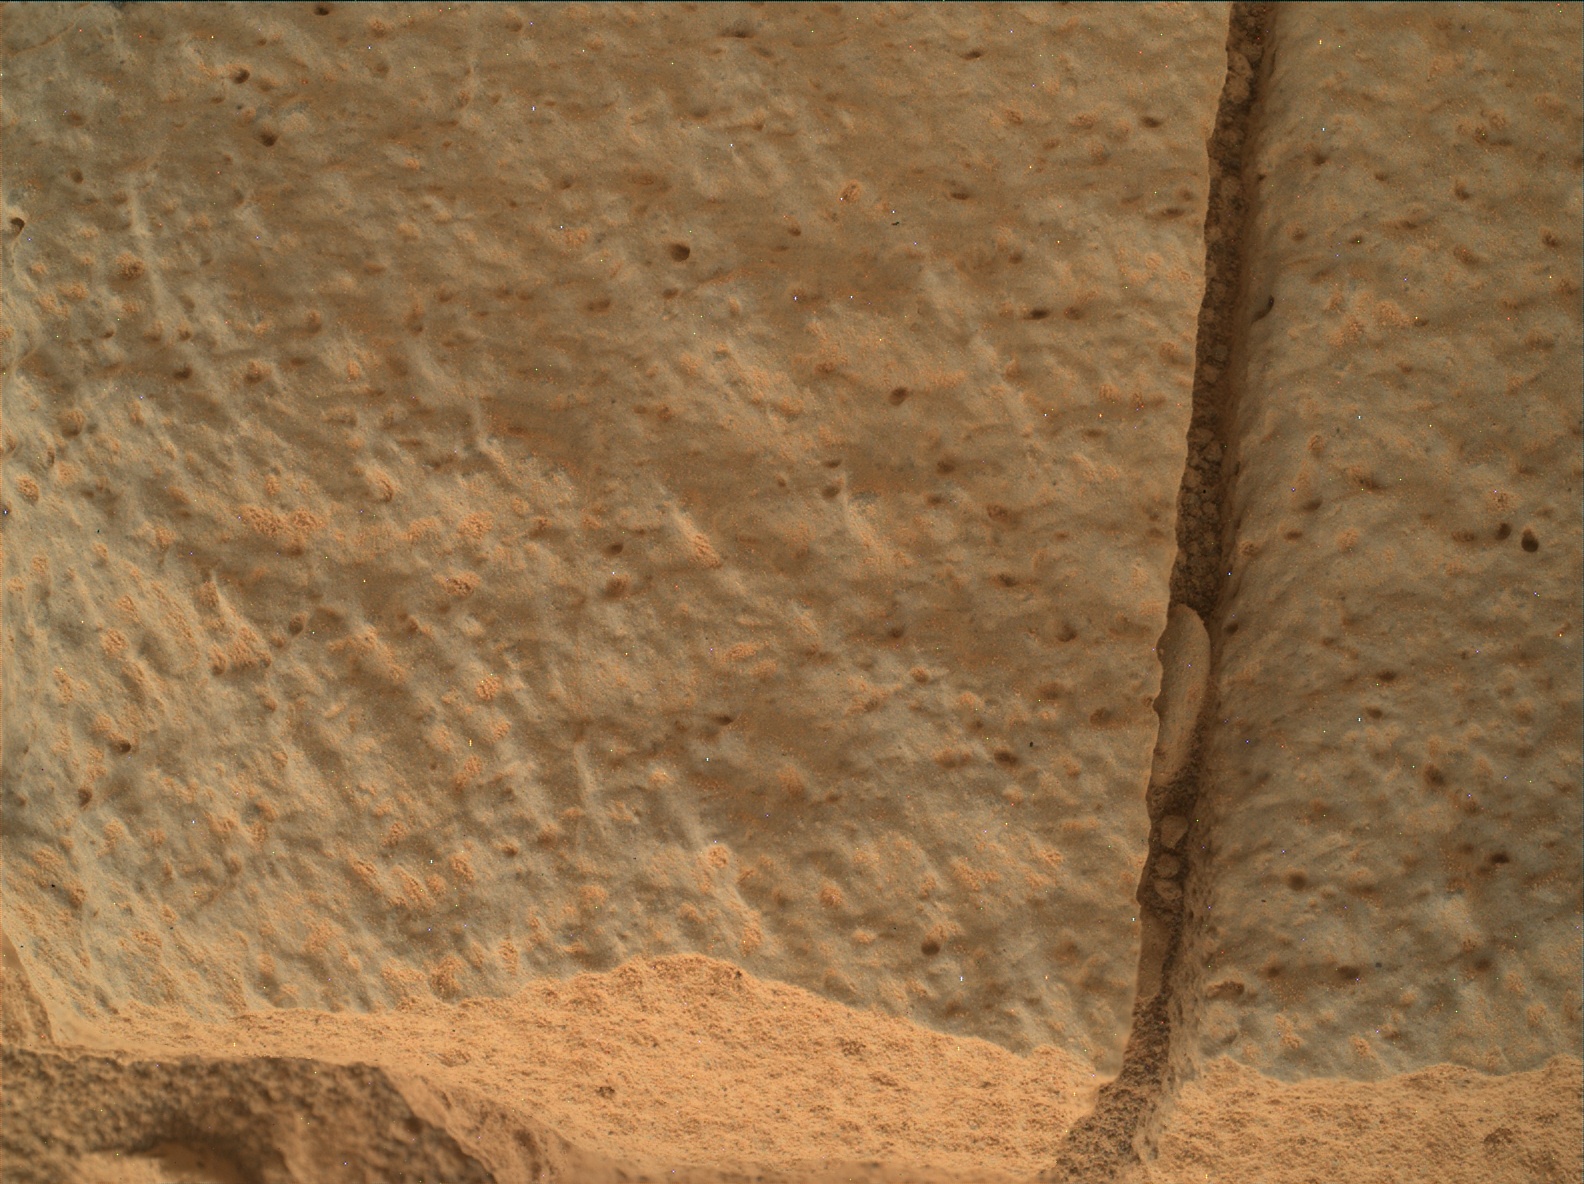 Nasa's Mars rover Curiosity acquired this image using its Mars Hand Lens Imager (MAHLI) on Sol 813